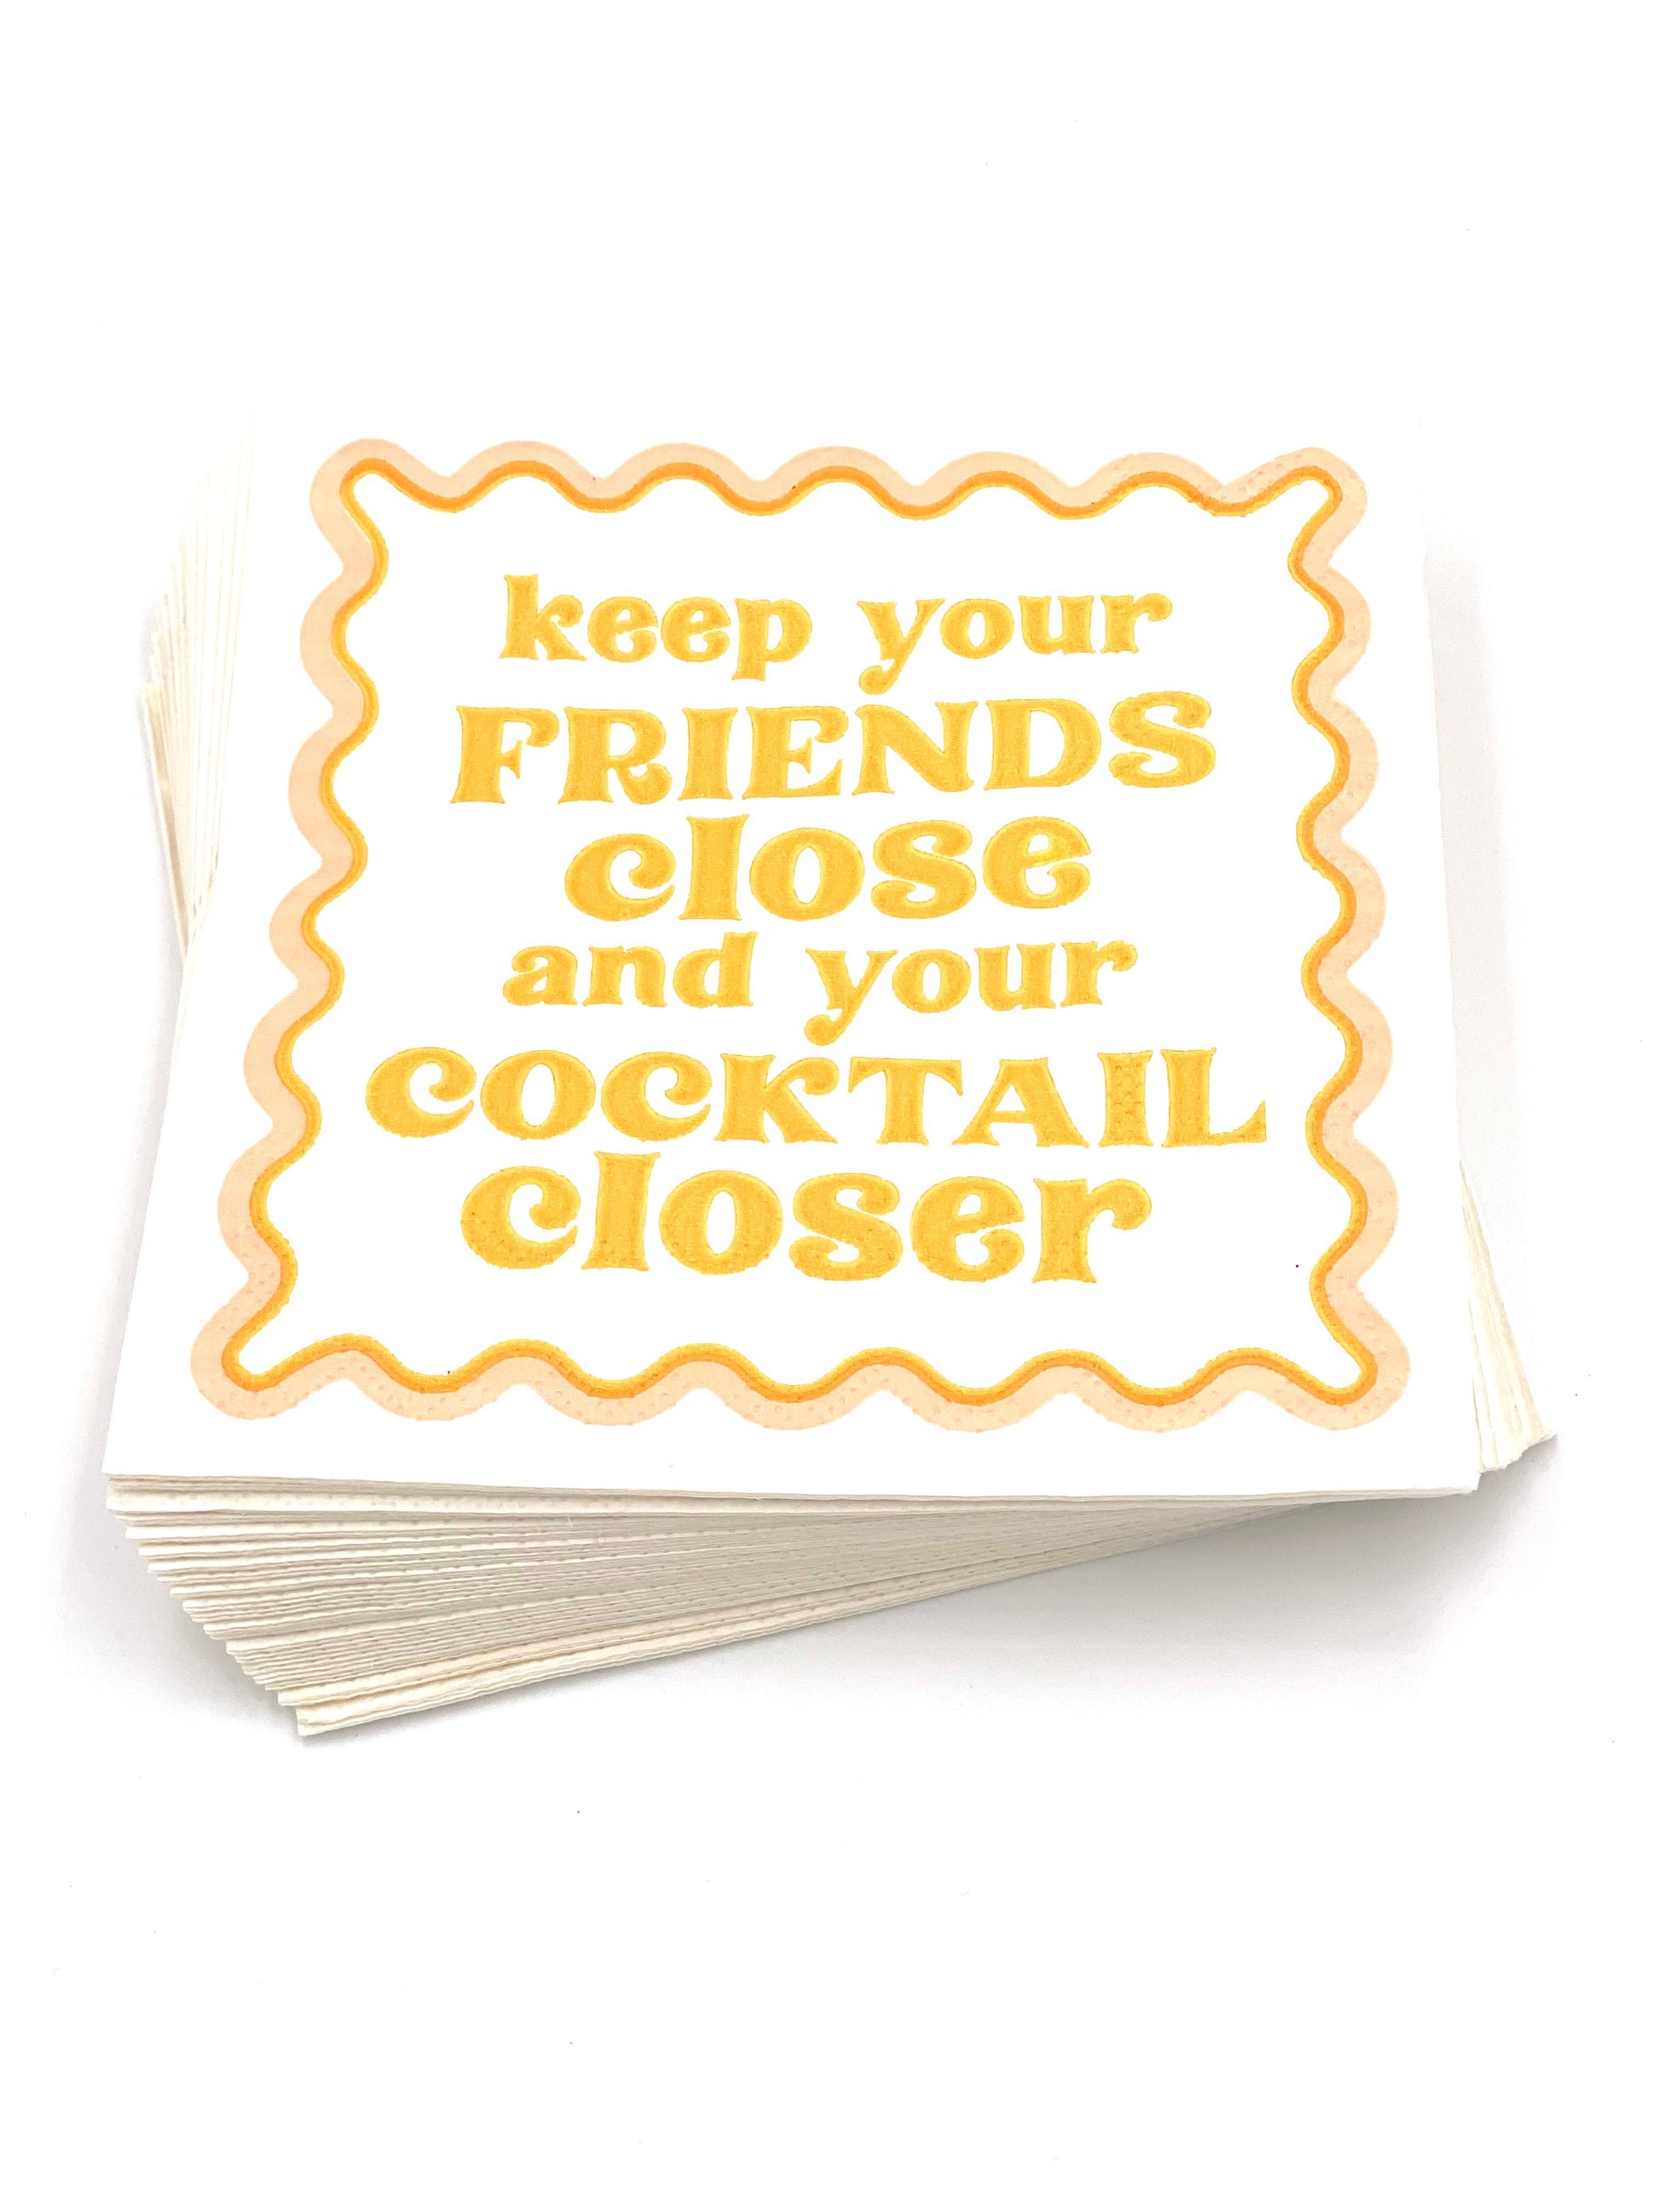 Paper Beverage/Appetizer/Cocktail Napkins/Wine Humor/Disposable Napkins for Parties and Entertainment/Party Supplies, Keep Your Friends Close and Your Cocktail Closer NapkinsPaper Beverage/Appetizer/Cocktail Napkins/Wine Humor/Disposable Napkins for Parties and Entertainment/Party Supplies, Keep Your Friends Close and Your Cocktail Closer Napkins